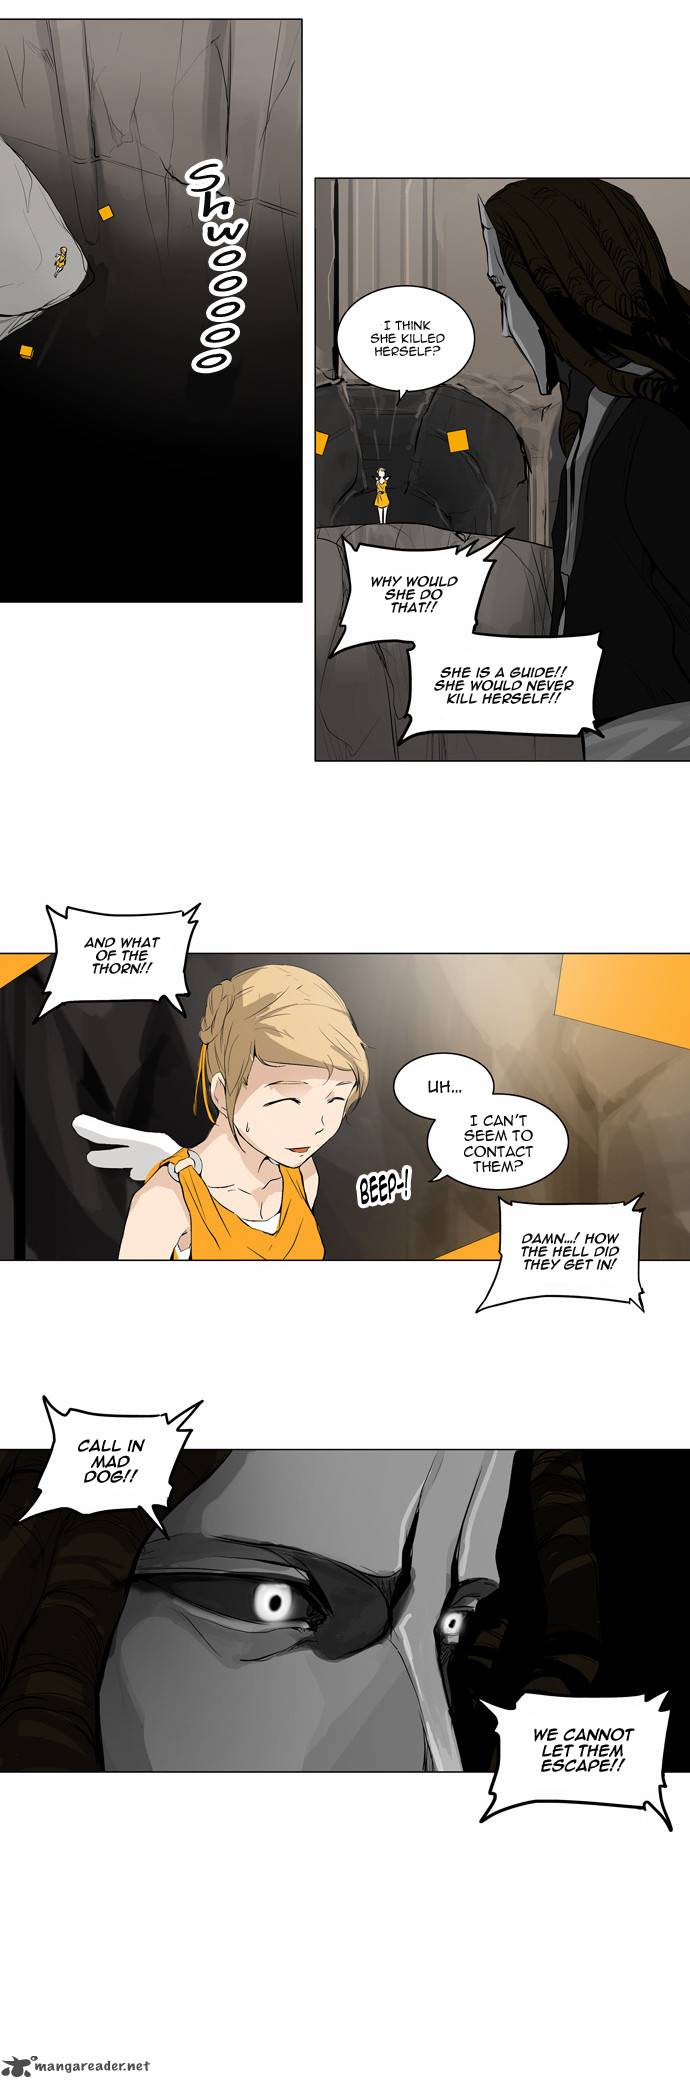 Tower Of God 170 14